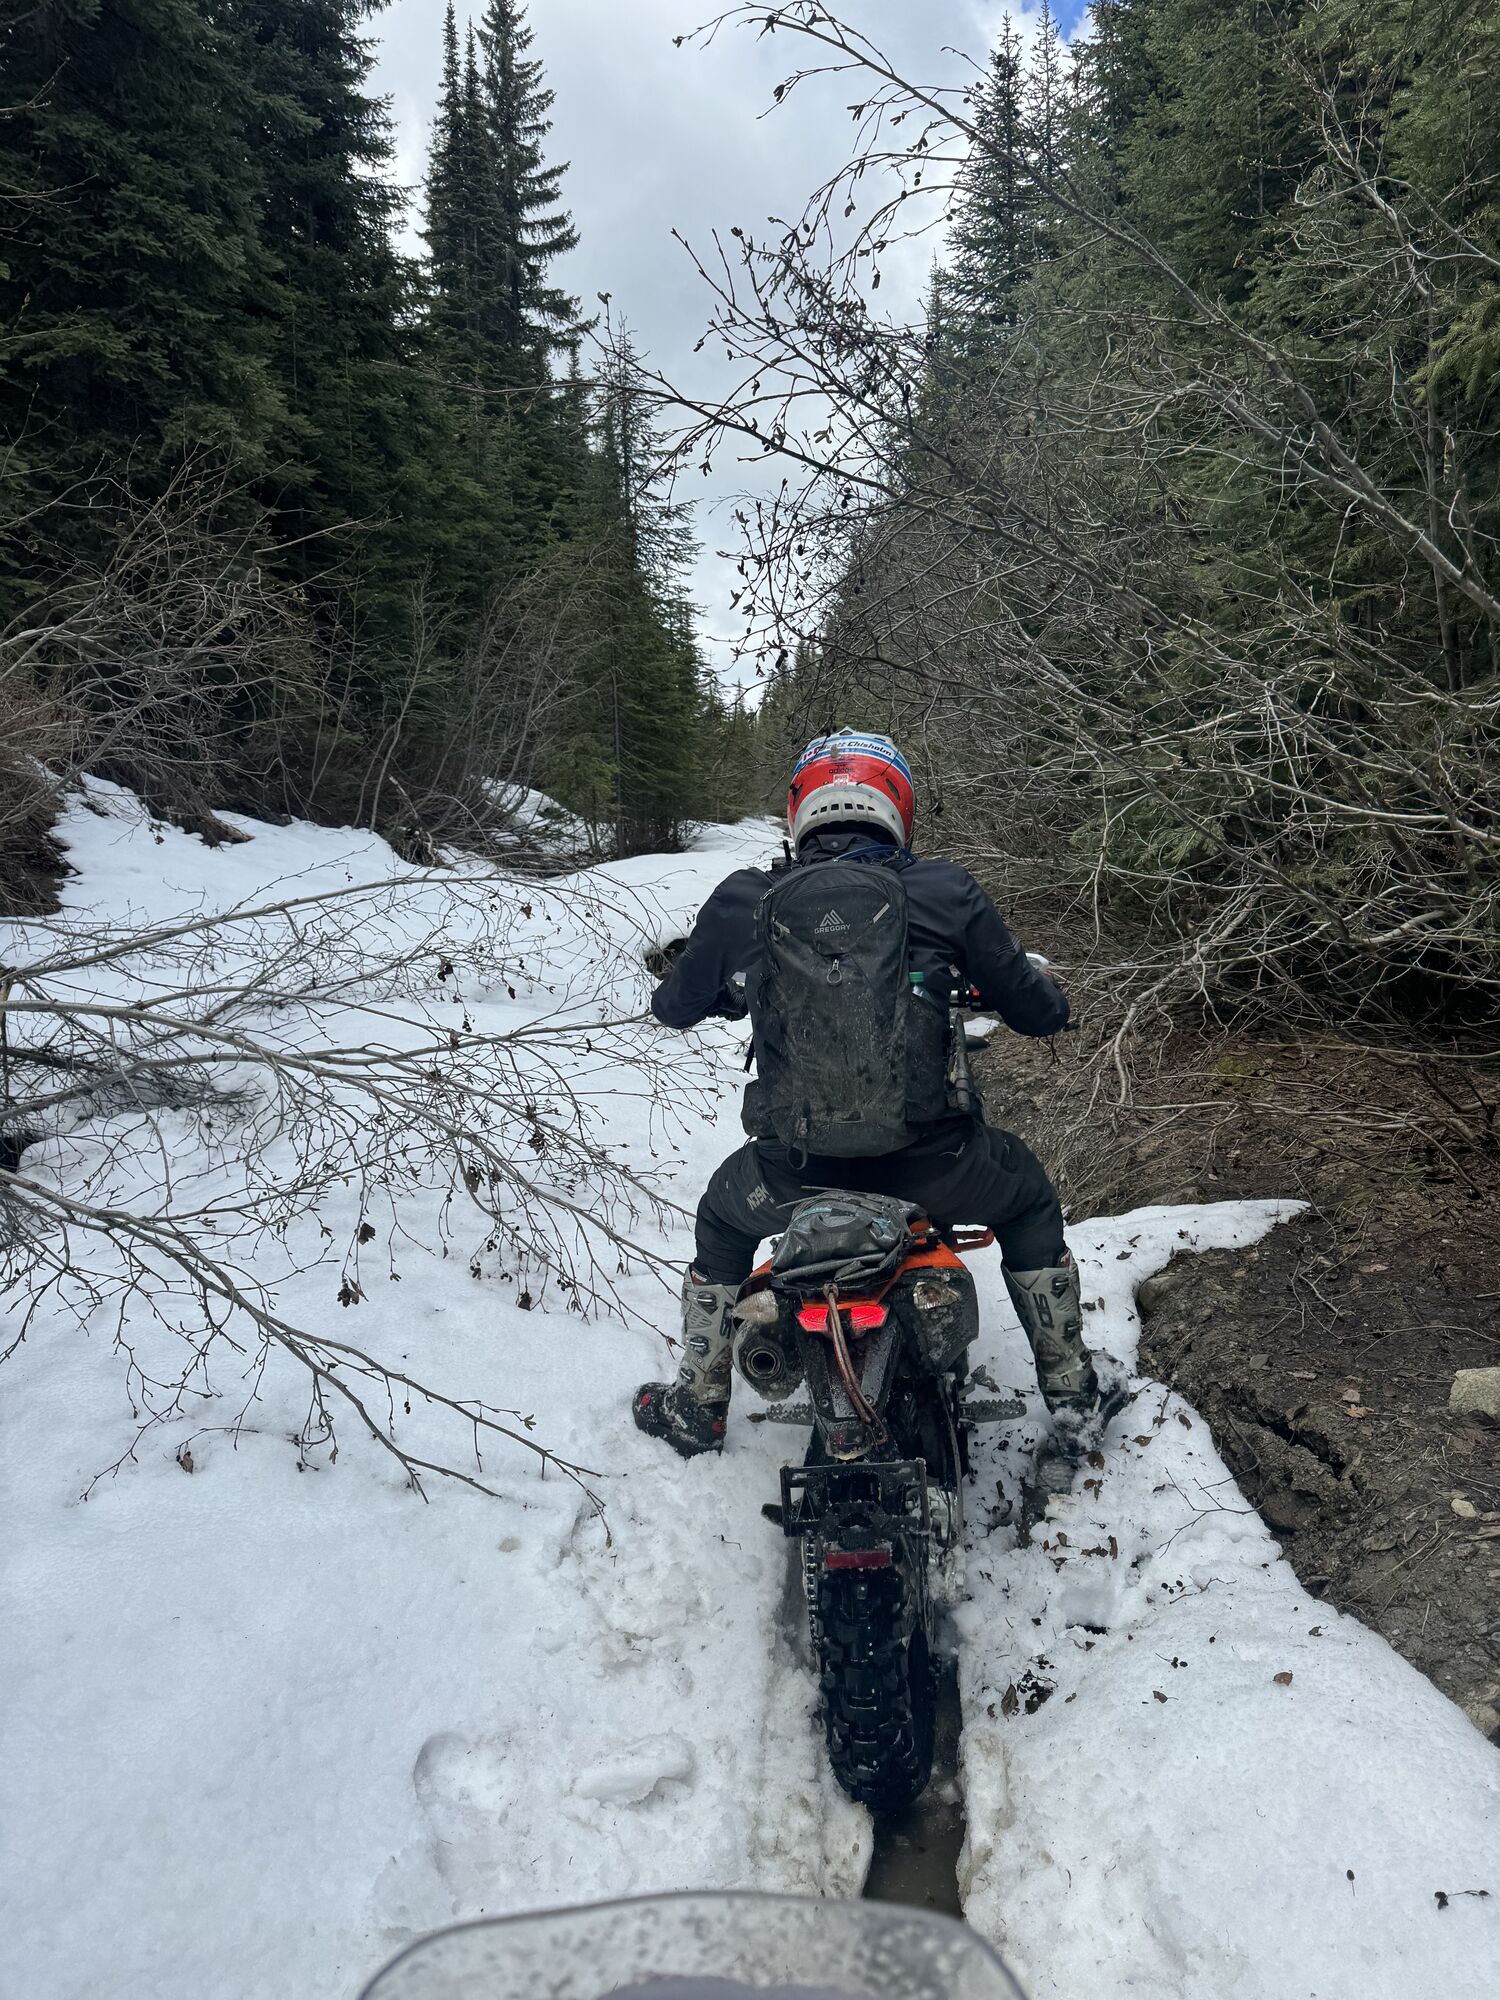 Snowbike season is supposed to be over